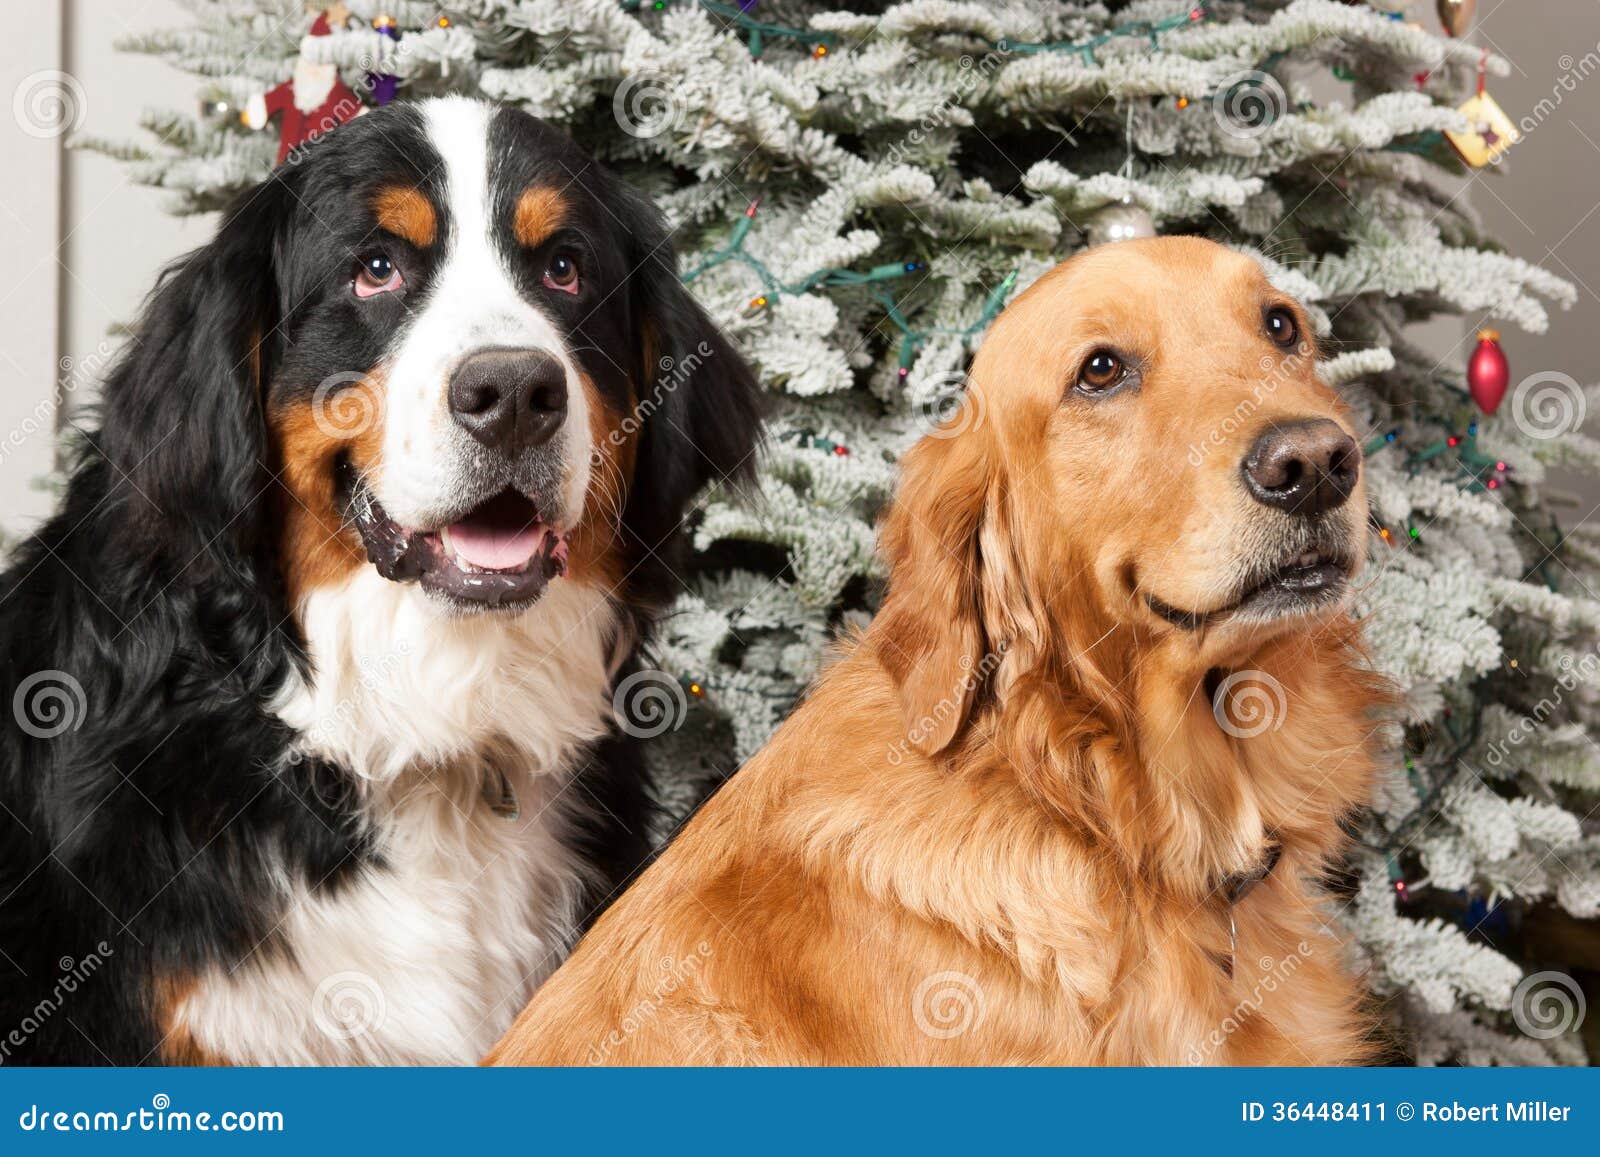 Two Purebred Dogs With Christmas Tree Stock Image Image Of Gentle Season 36448411